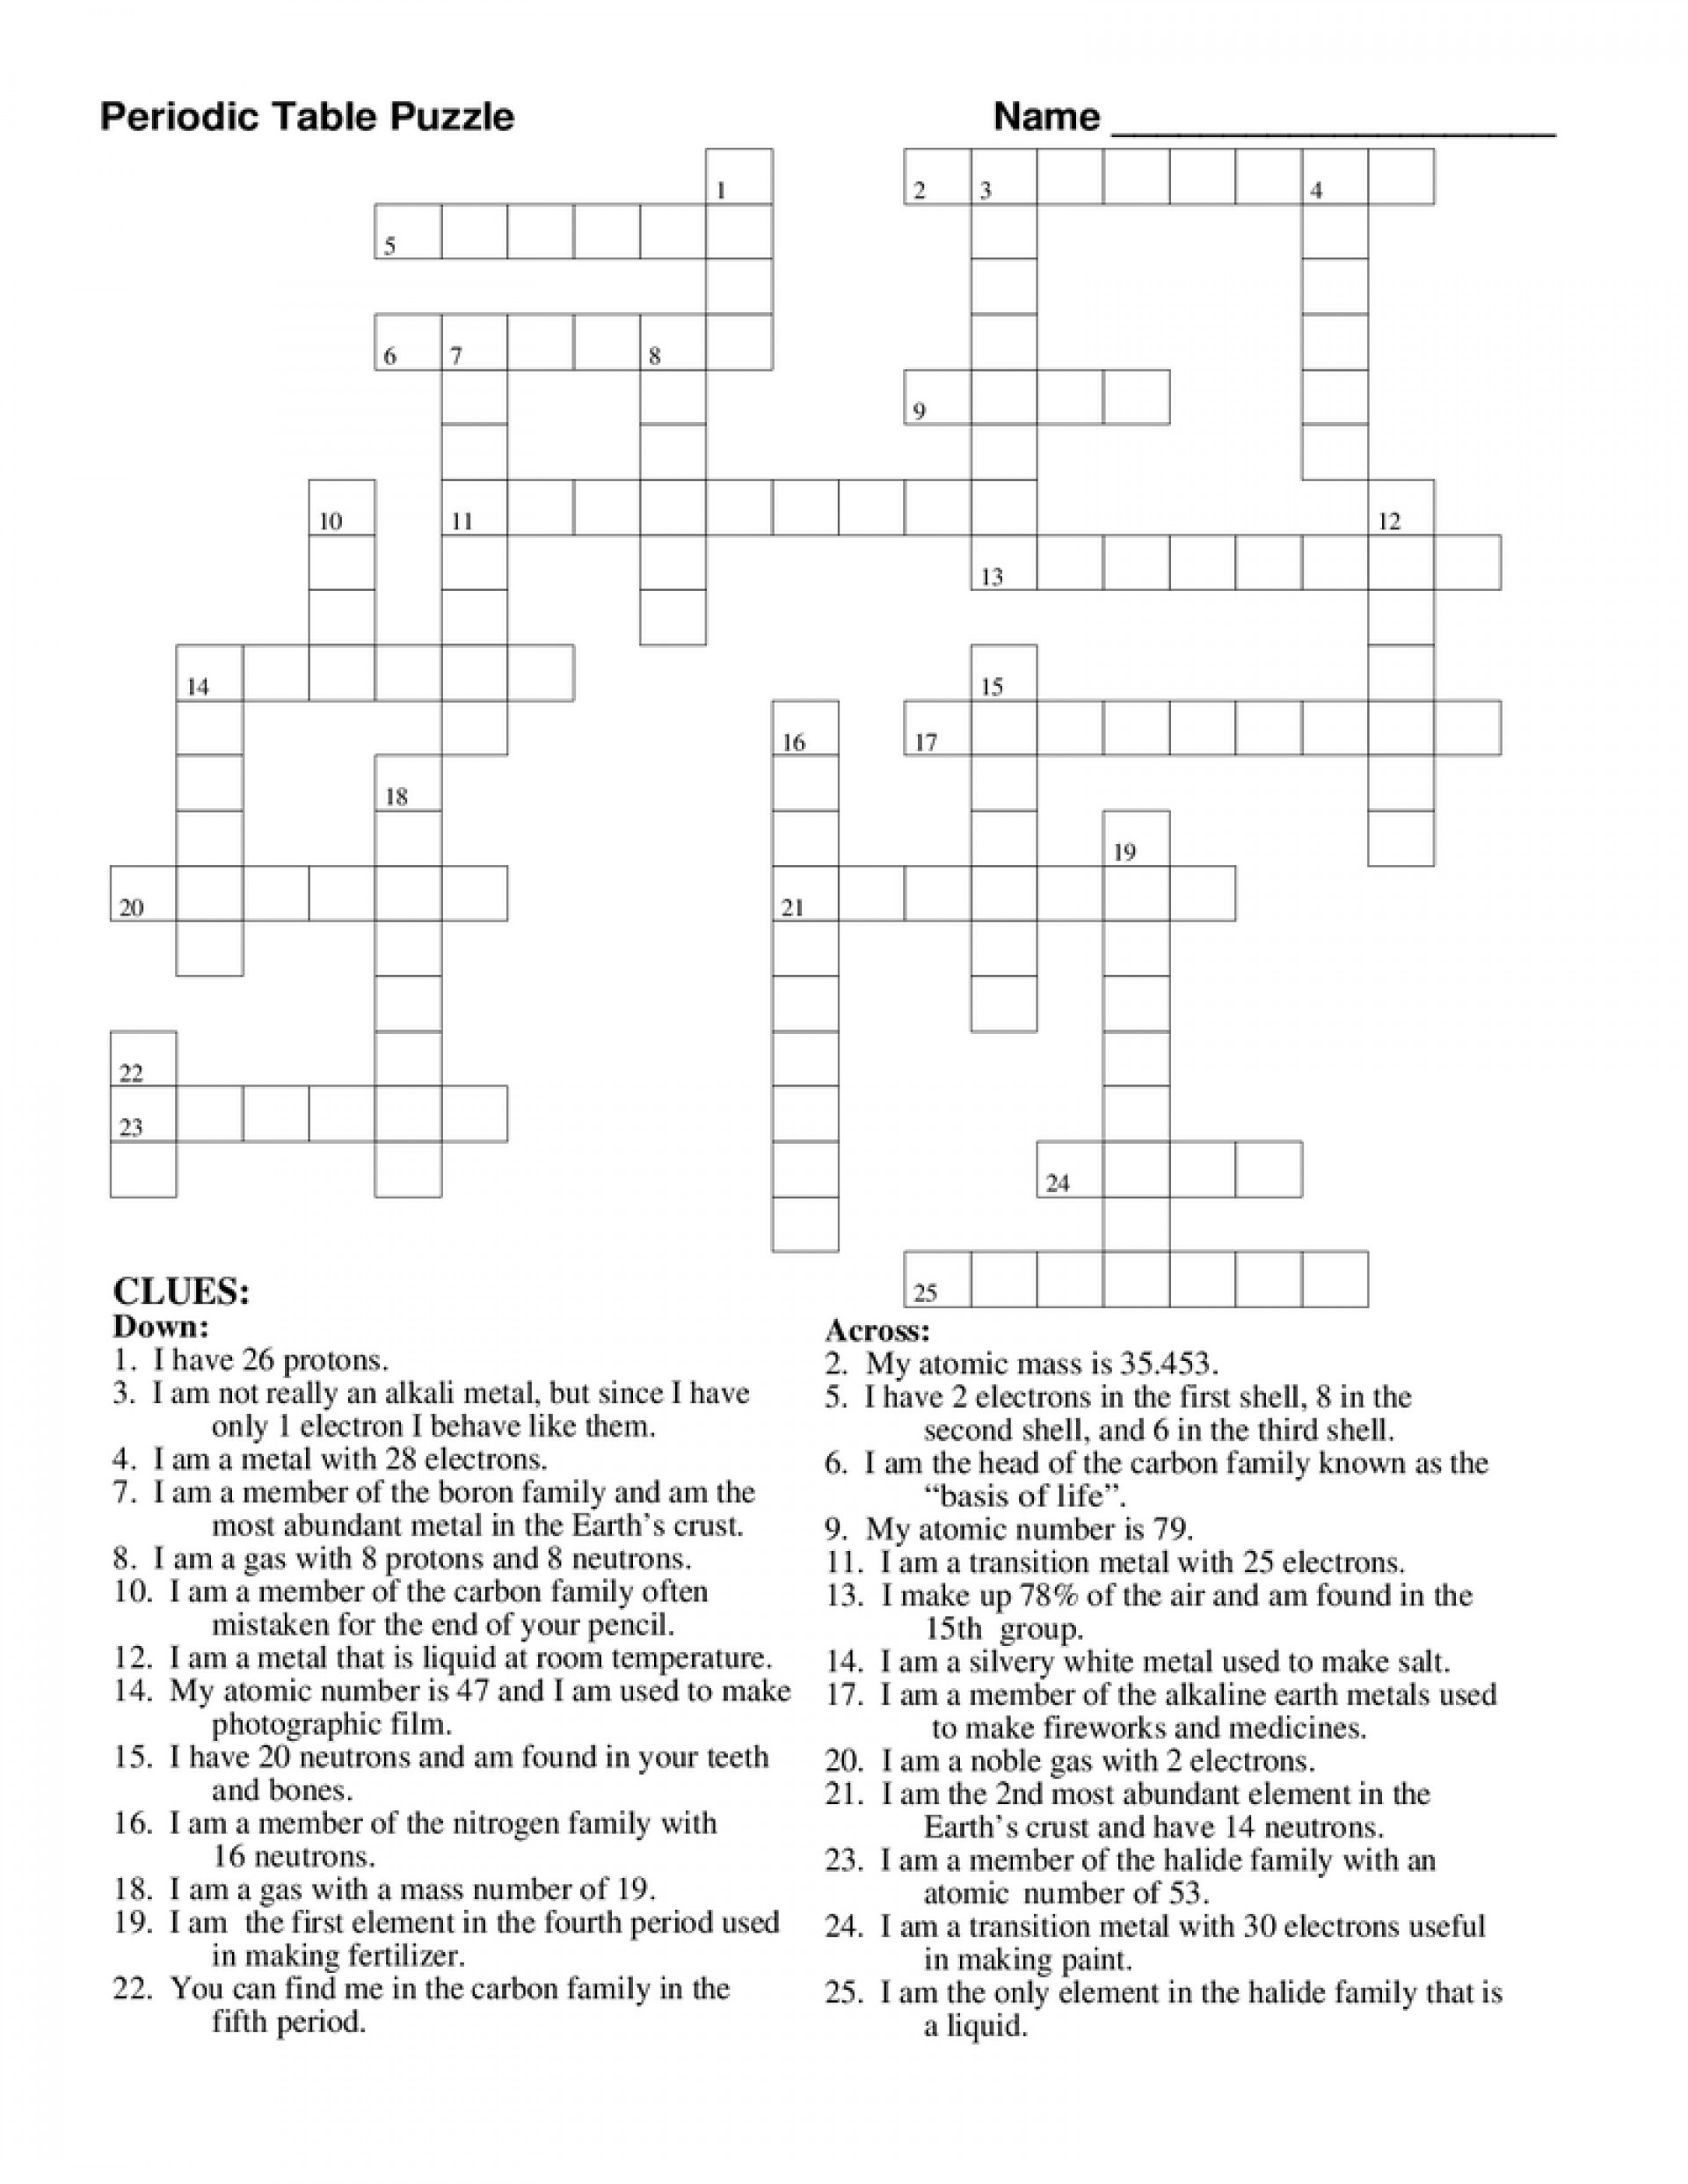 Printable Crossword Puzzles With Answers Pdf Printable Crossword Puzzles